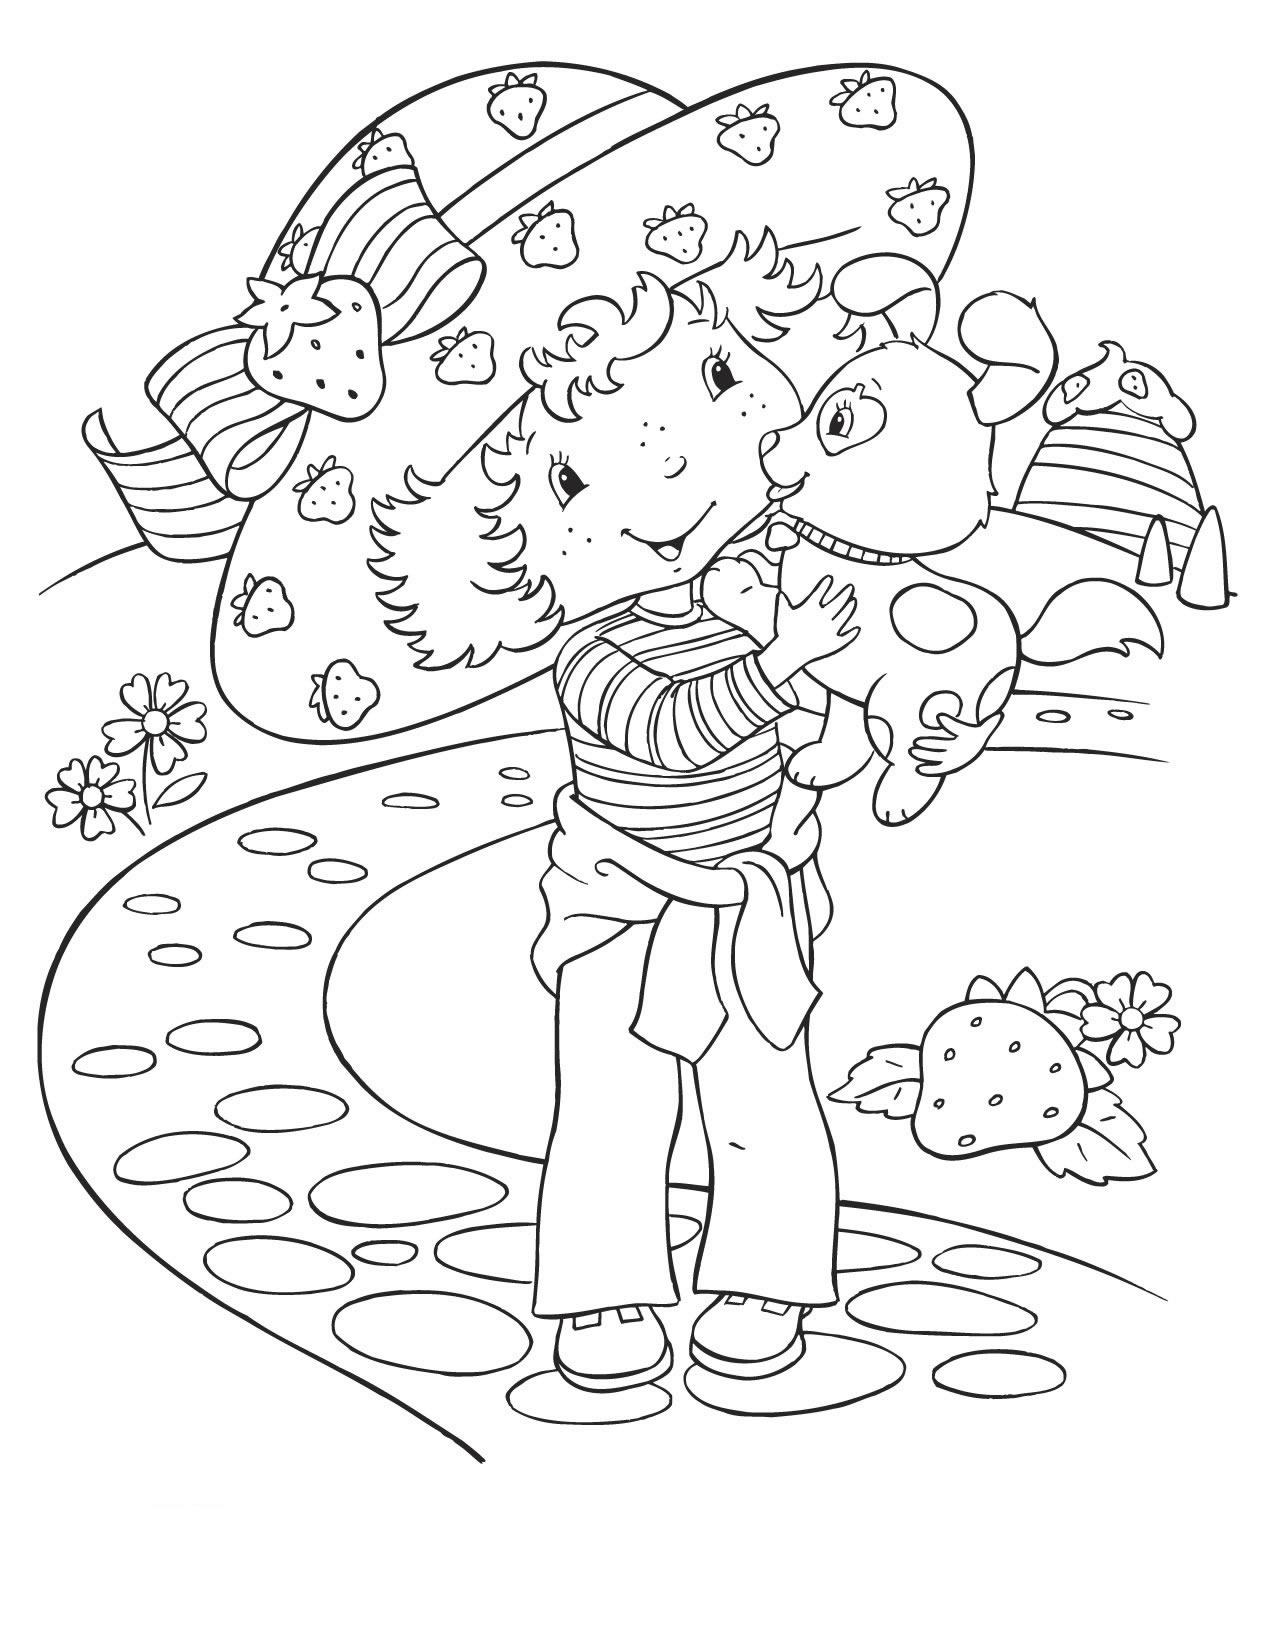 Strawberry shortcake coloring pages for kids